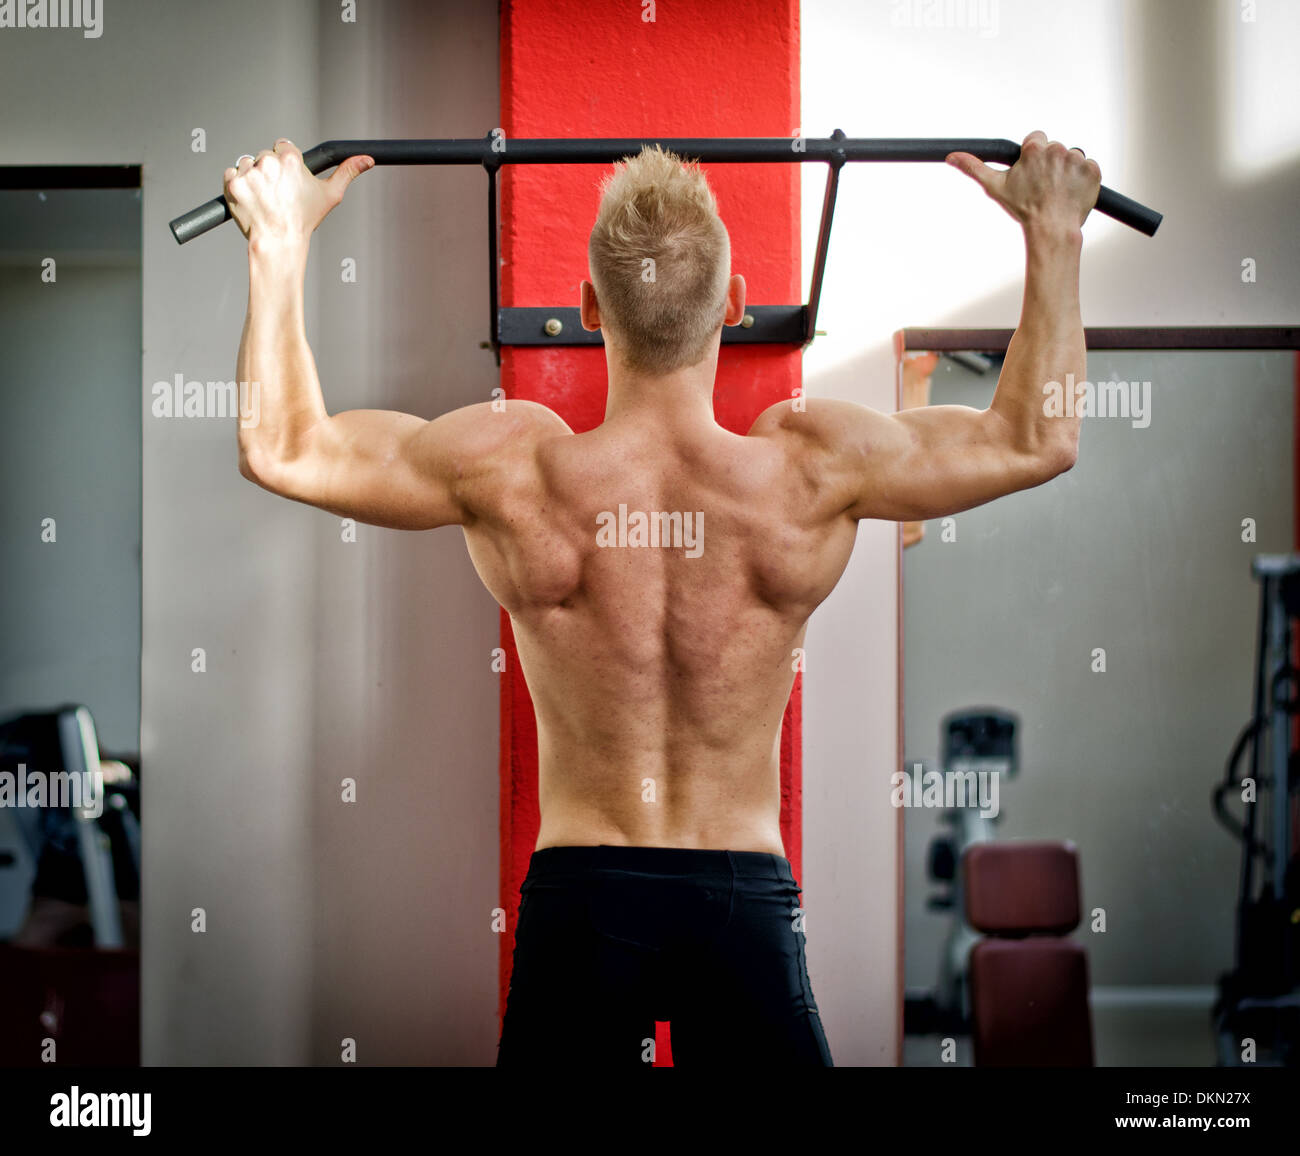 Athlete Doing Pull-up Bar Abdominal Exercise in Gym Stock Photo - Image of  bodybuilder, muscles: 100359300